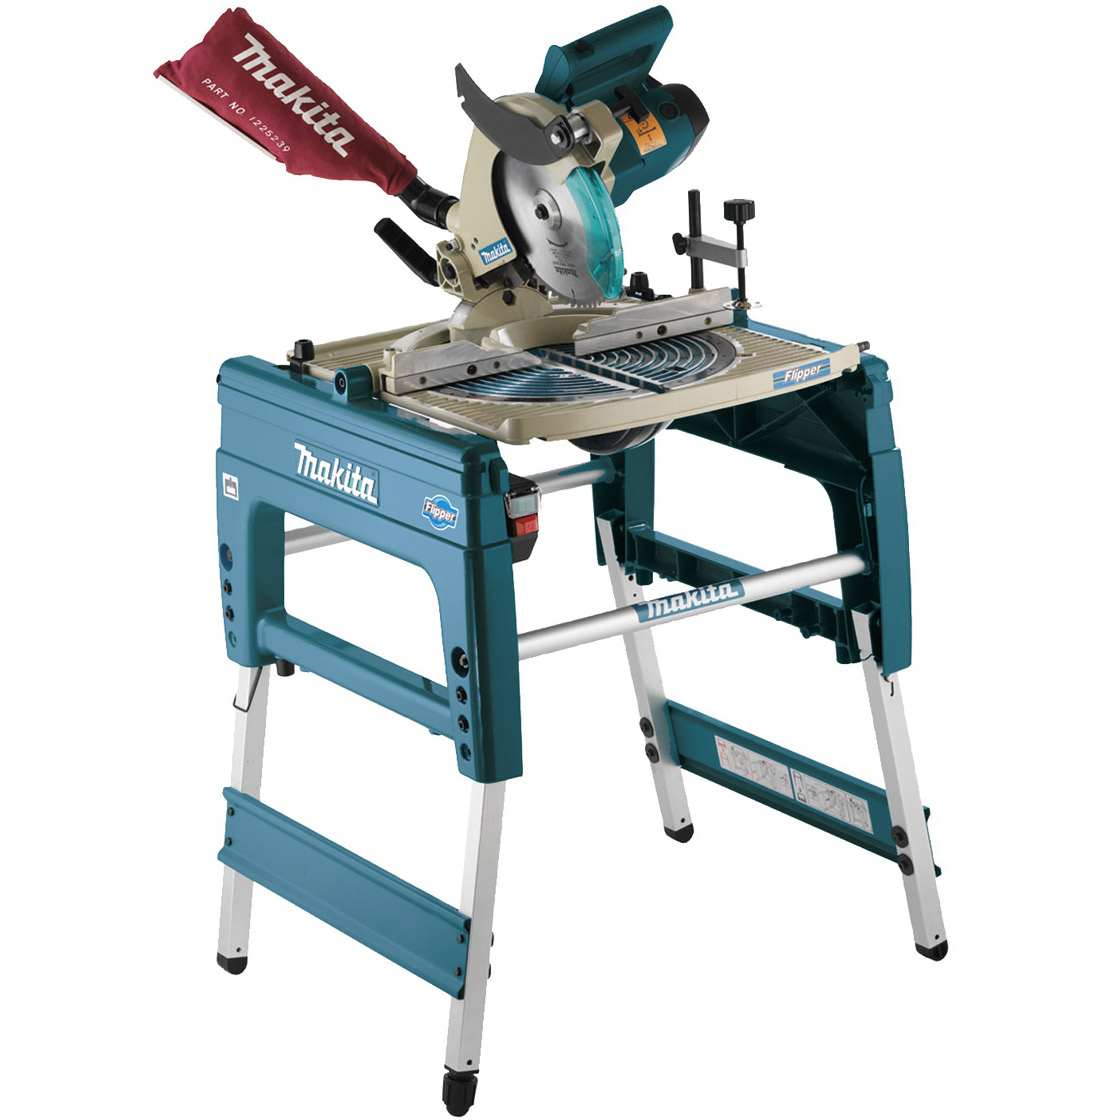 Makita Flip Over Saw 260mm(10"), 1650W, 36kg LF1000 - Click Image to Close